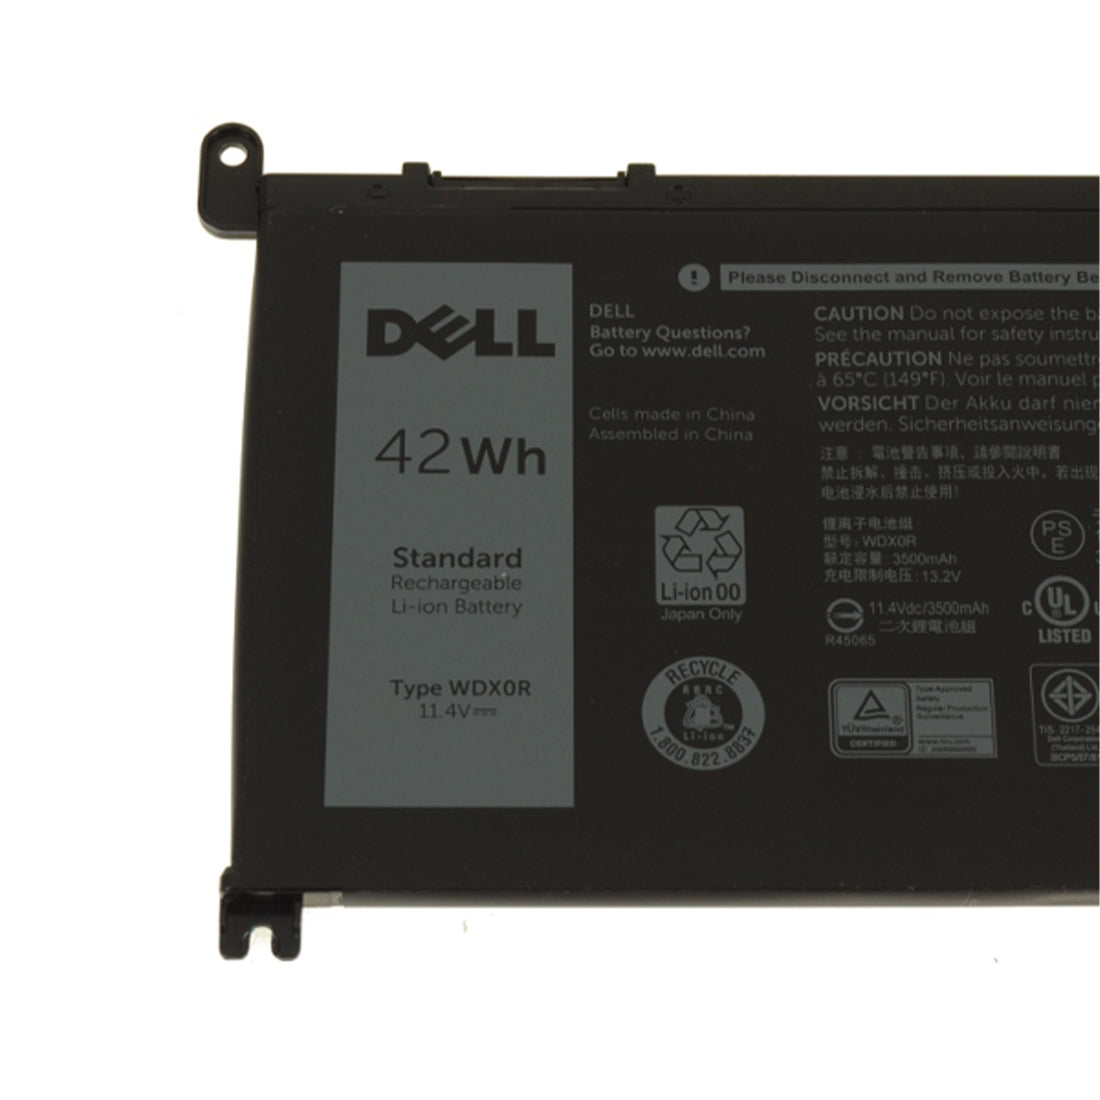 Dell Original 3500mAh 11.4V 42WHR 3-Cell Replacement Laptop Battery for Inspiron 13 7375